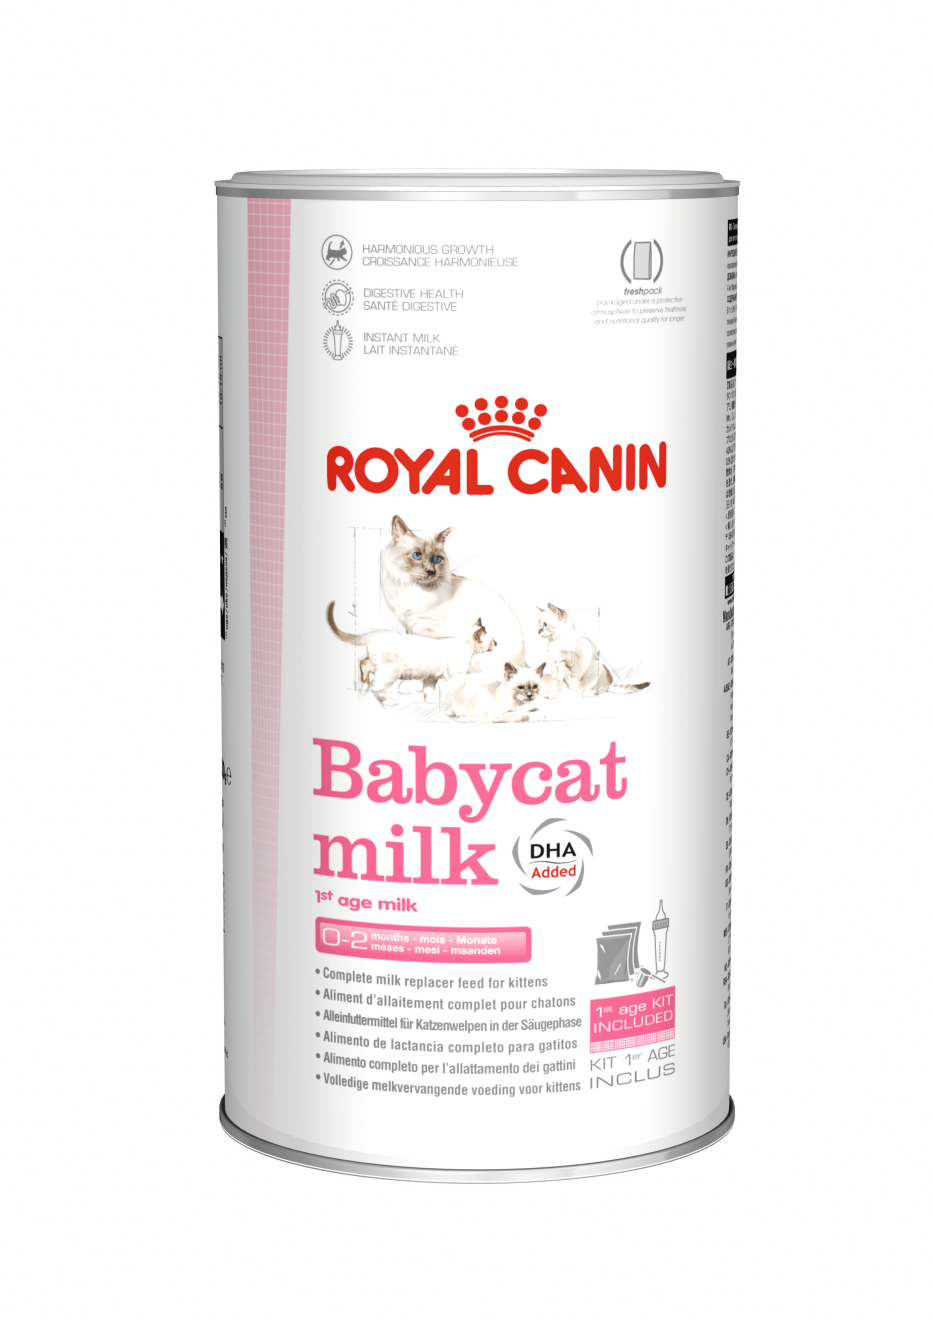 A healthy can be life-changing Royal Canin US